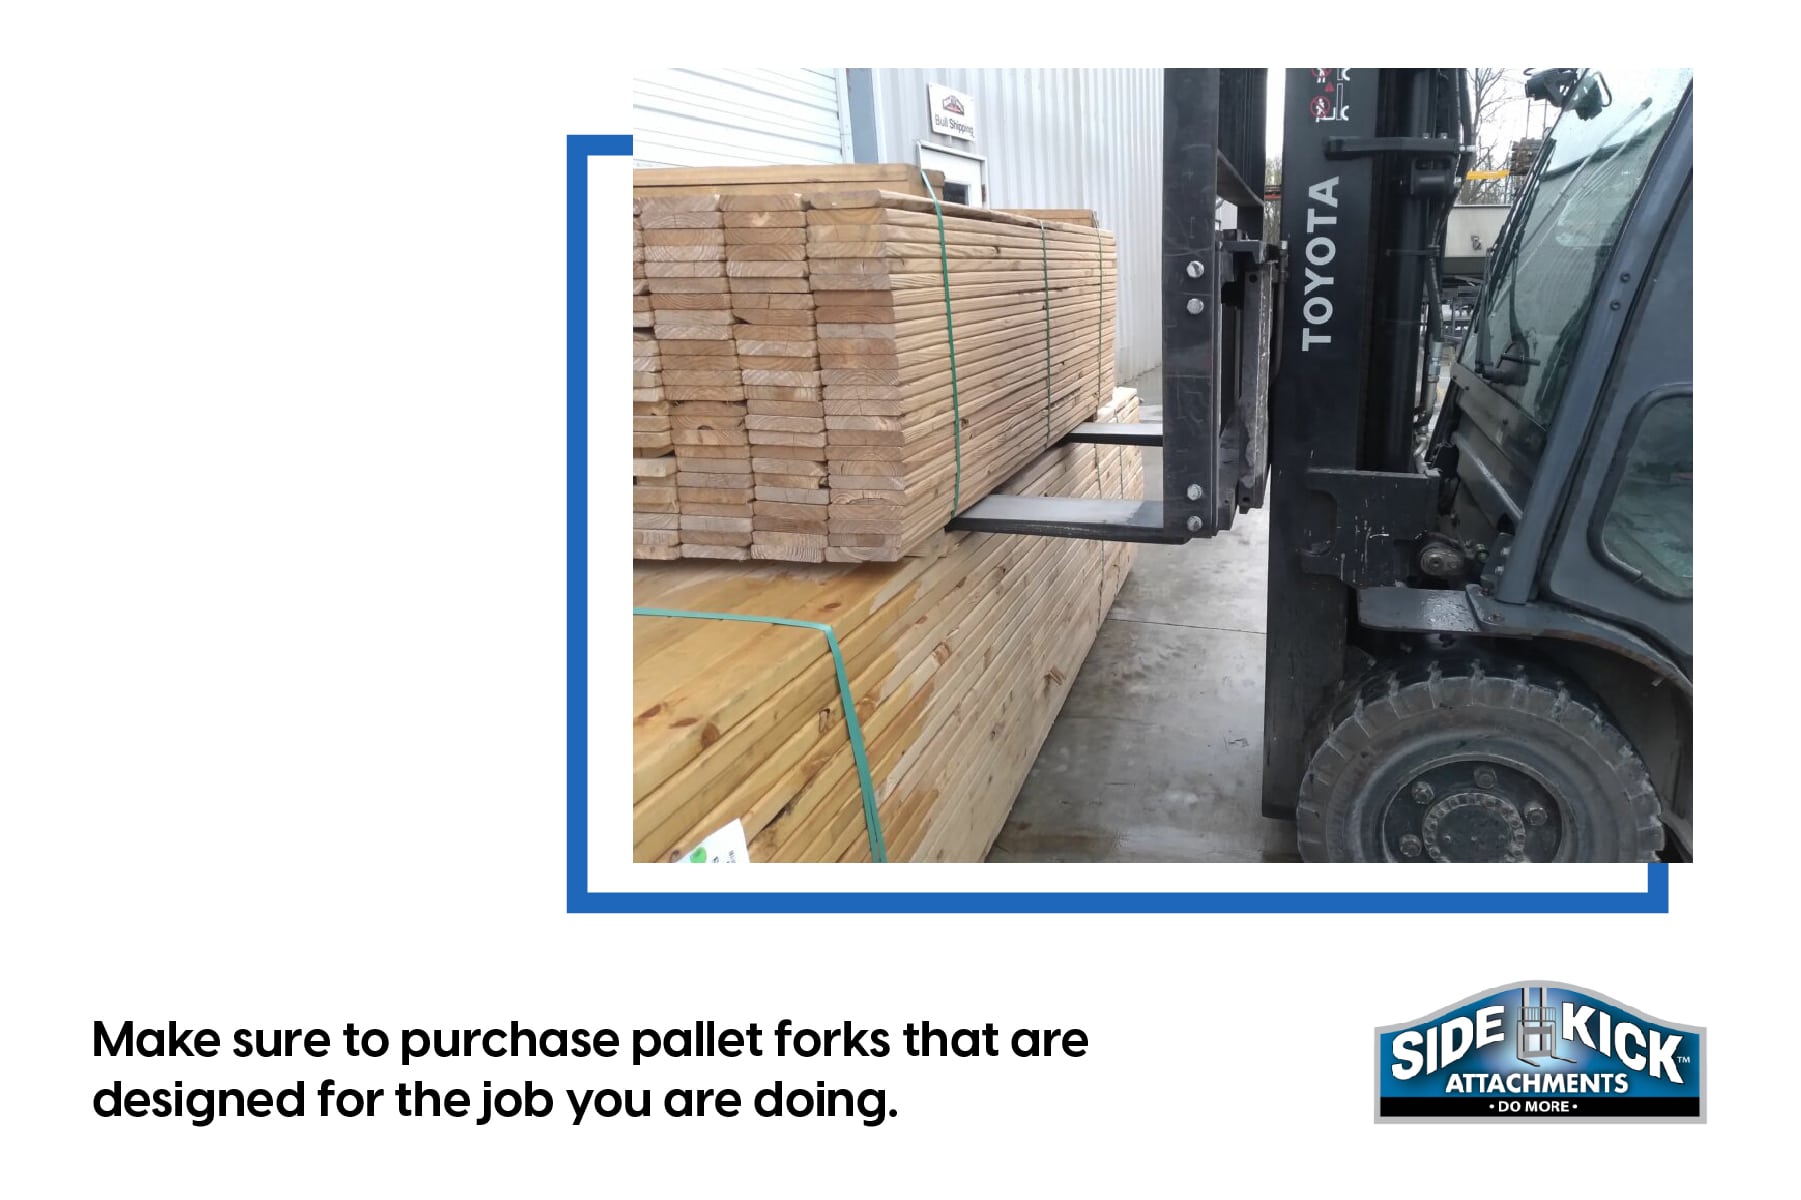 purchase pallet forks designed for the job you are doing